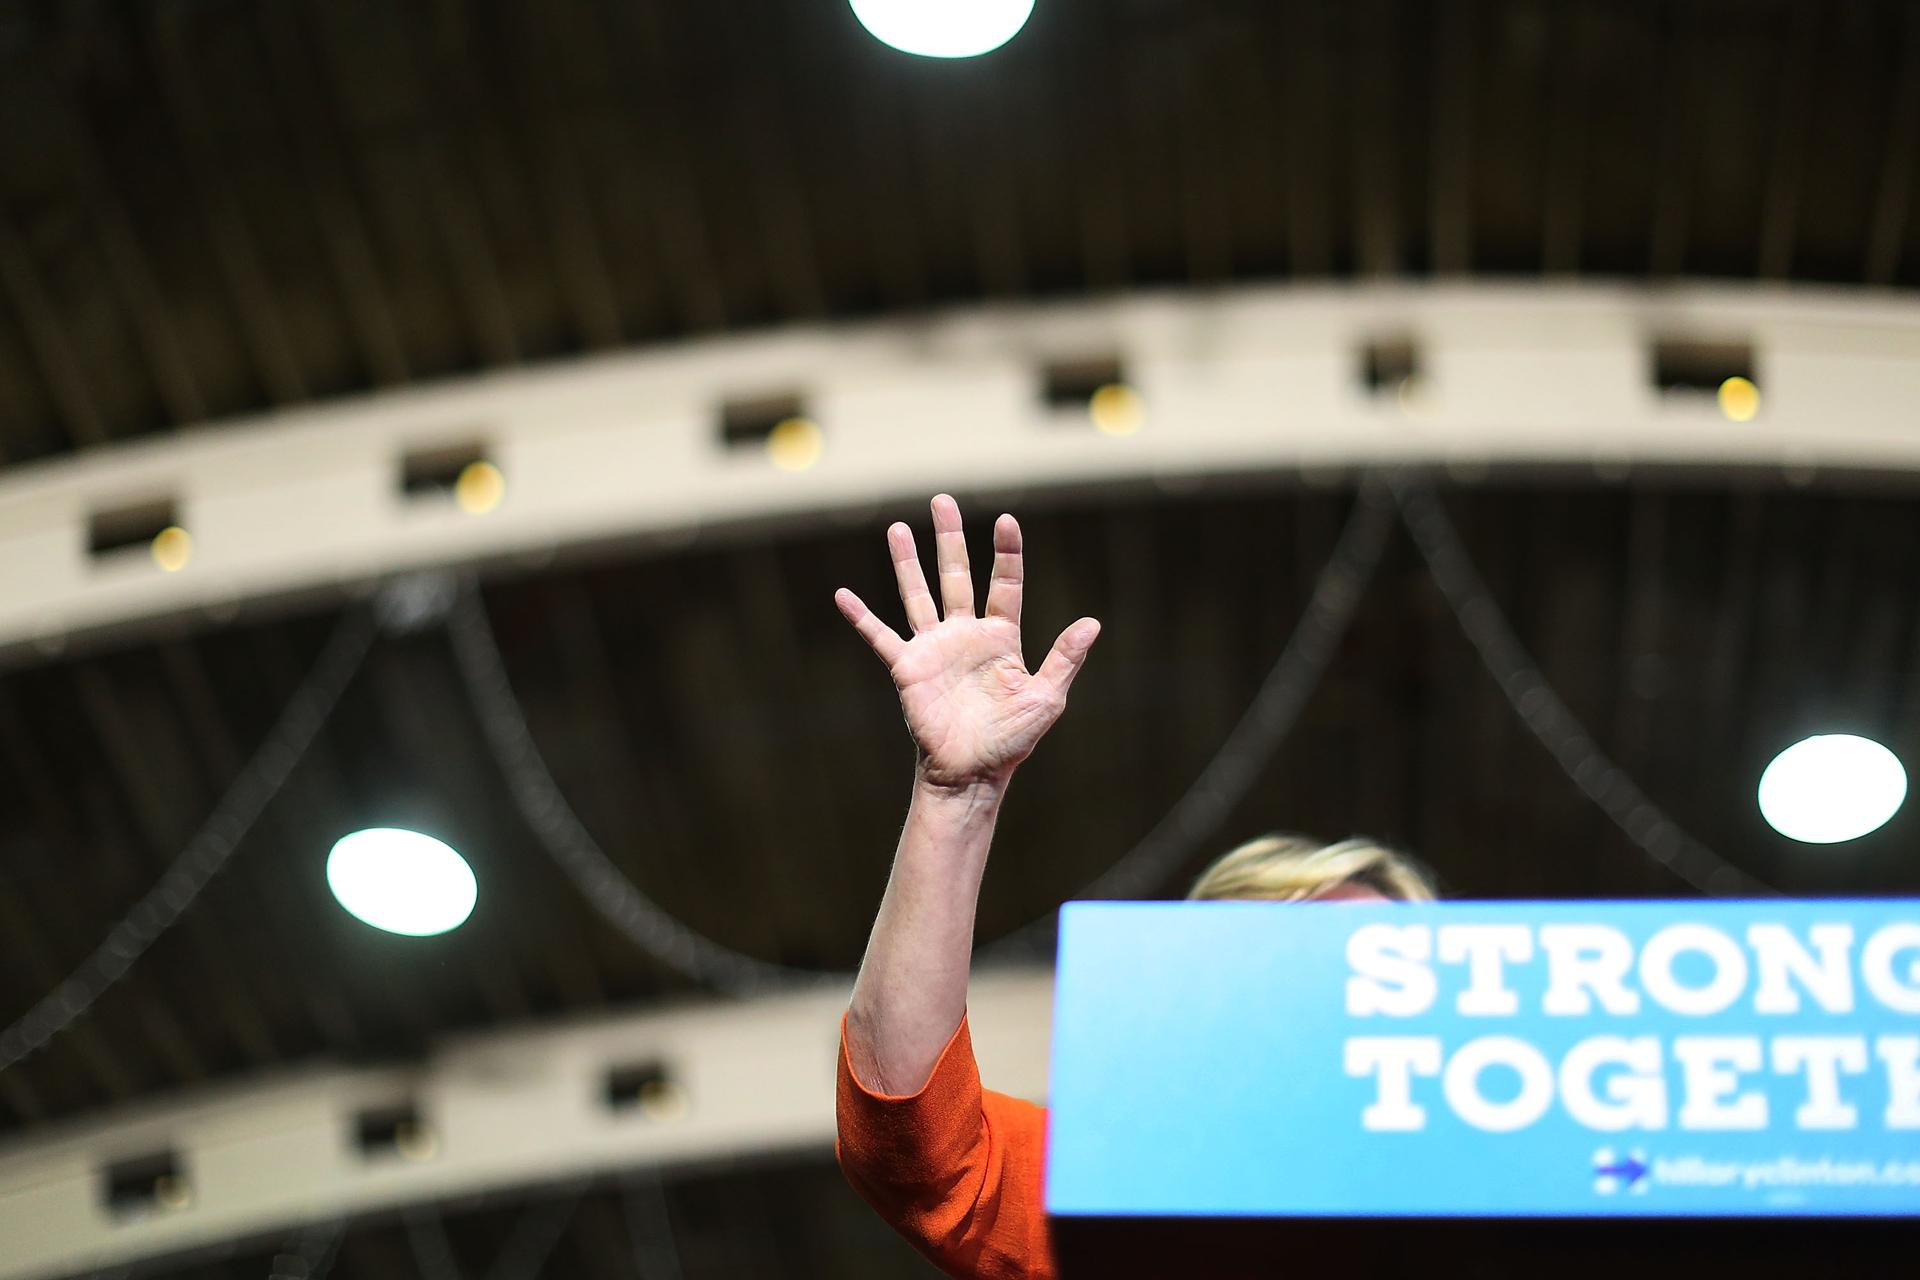 Democratic presidential nominee Hillary Clinton speaks during a campaign rally at the Coliseum on August 8, 2016 in St. Petersburg, Florida. A new national poll shows Clinton's lead expanding over Republican rival Donald Trump.